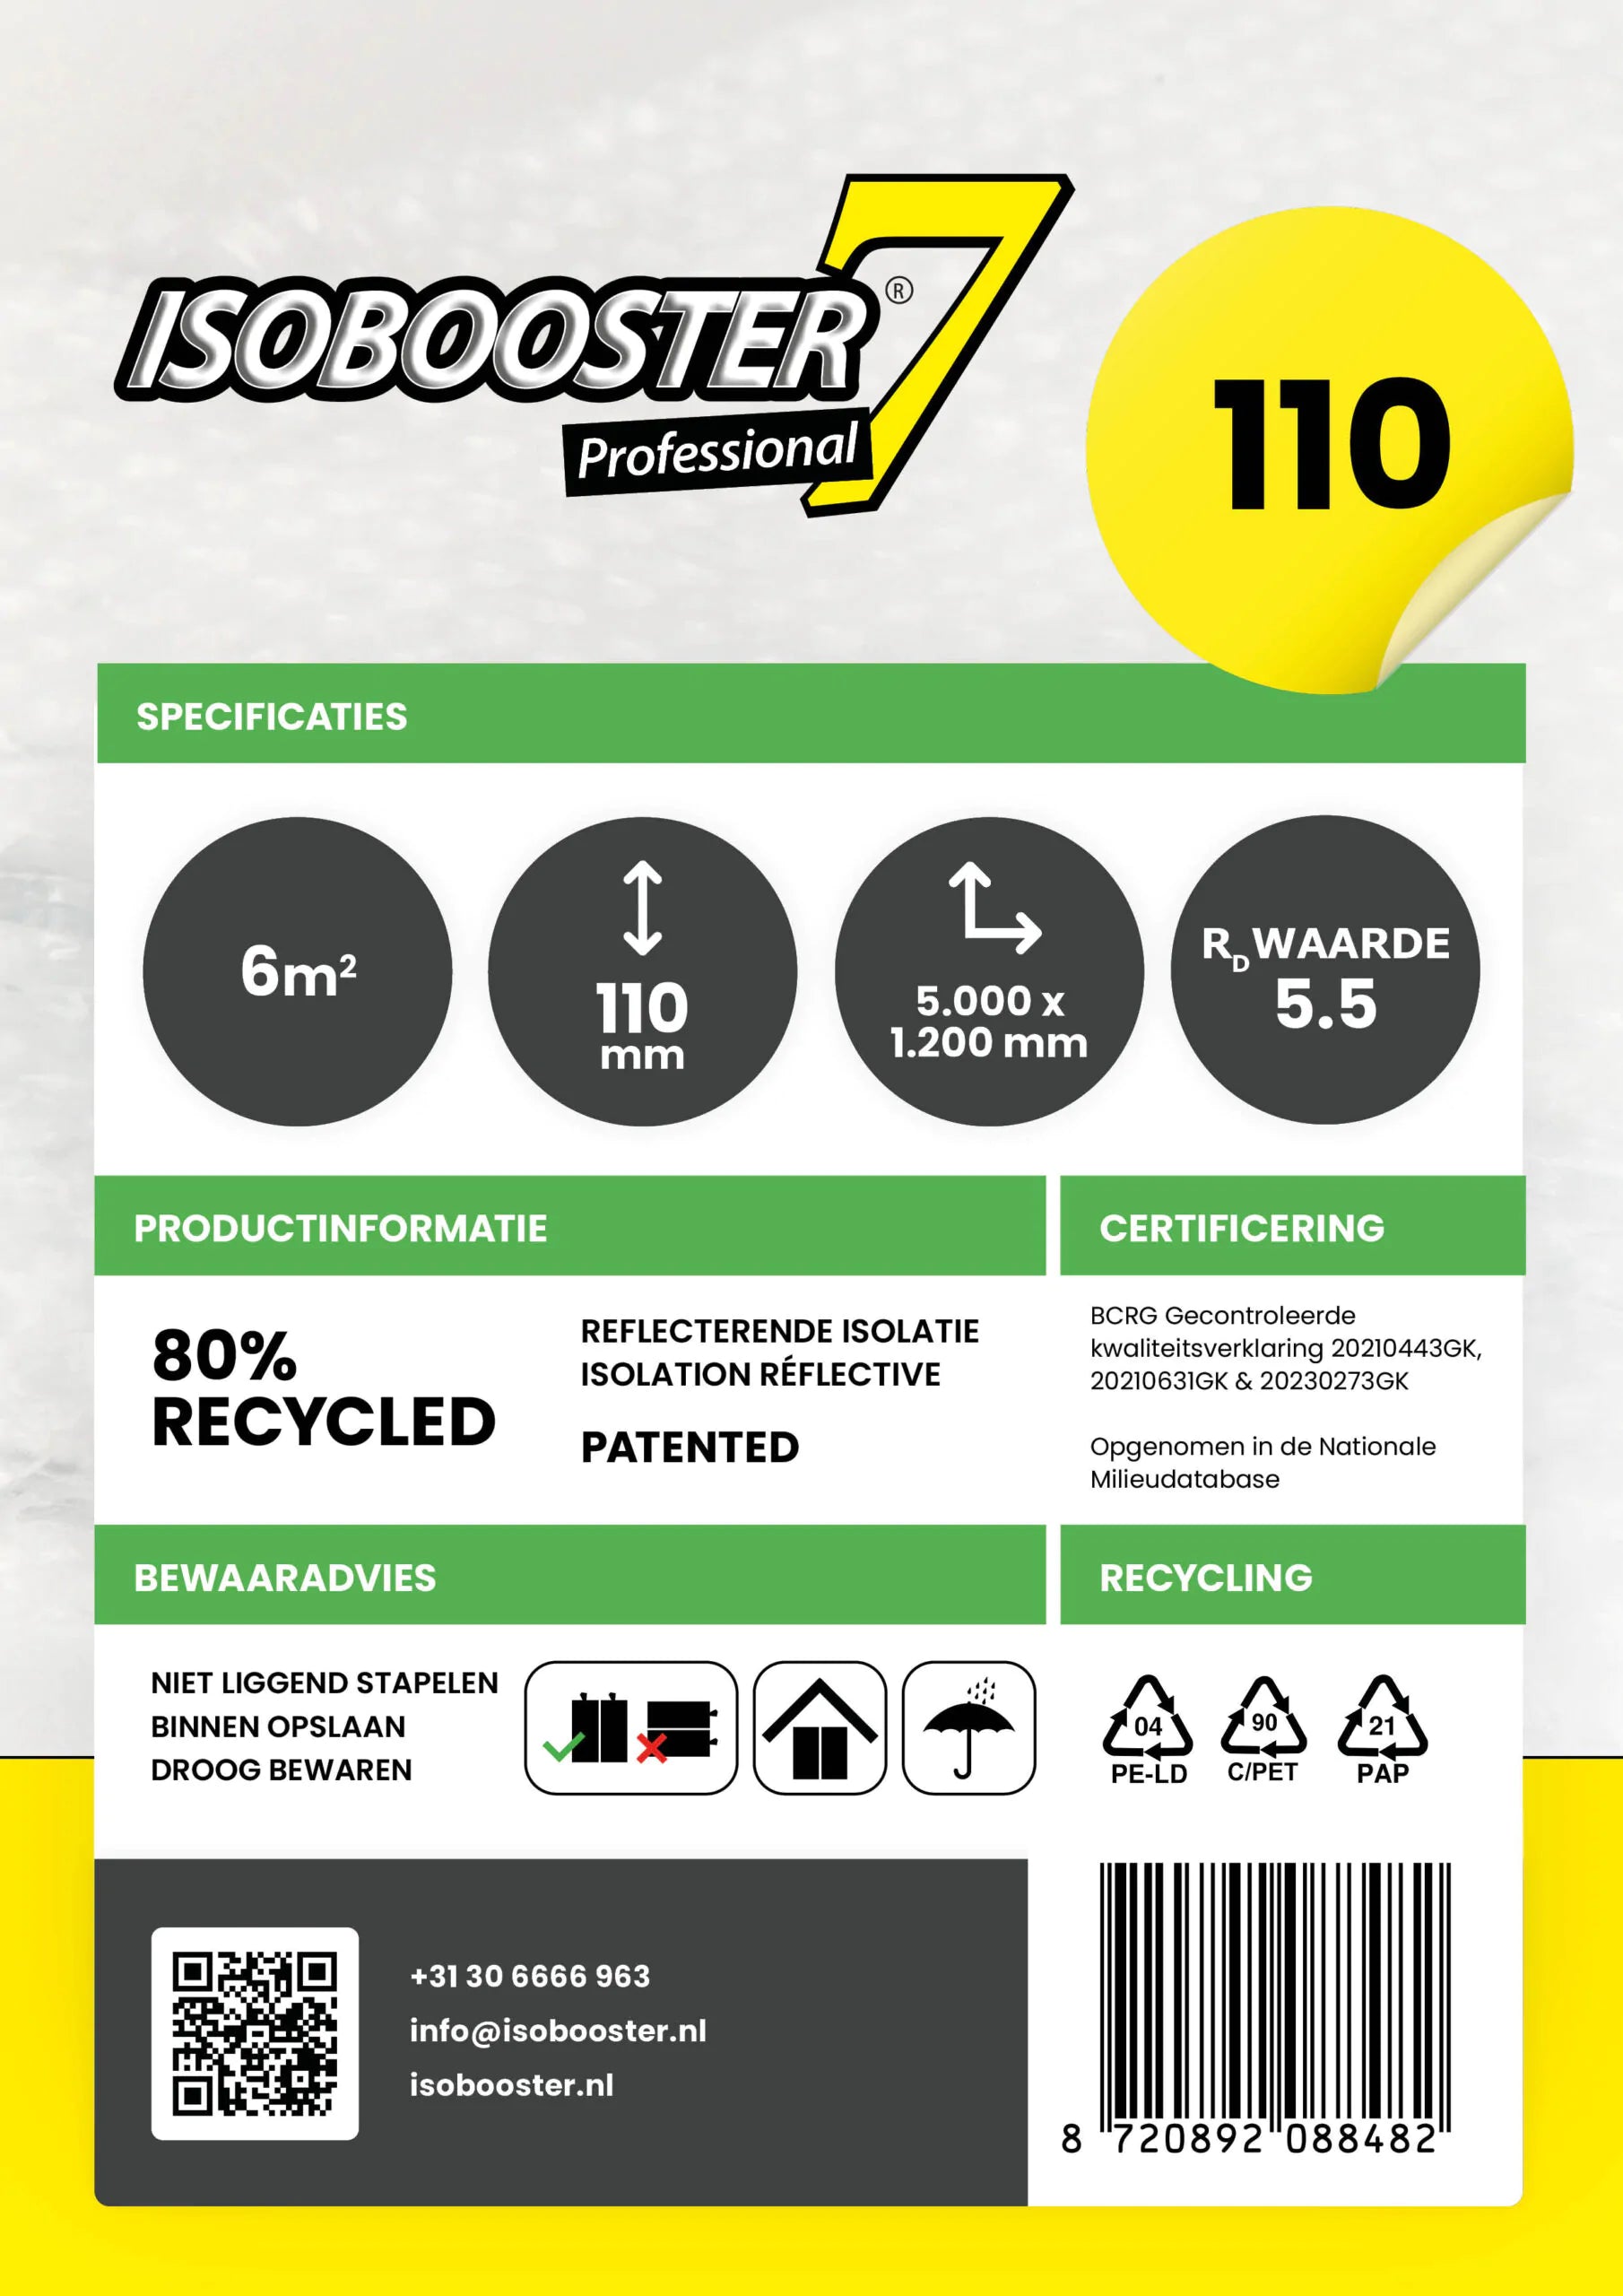 Isobooster Professional 110mm